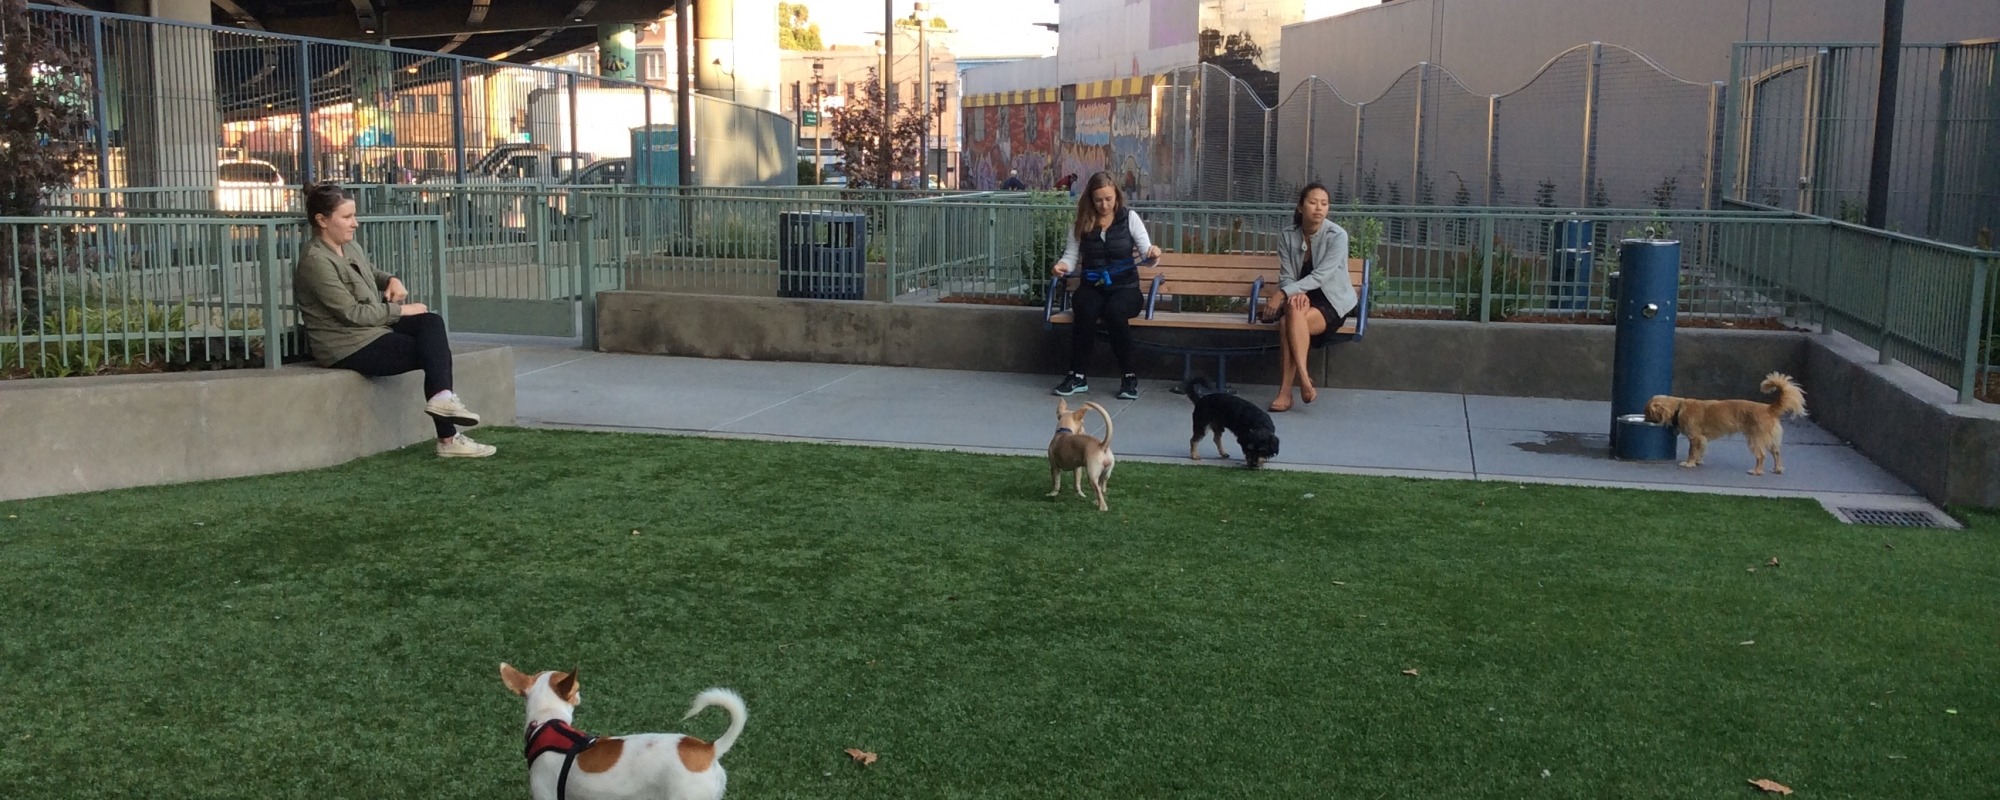 SoMa West - Skate Park and Dog Play Area